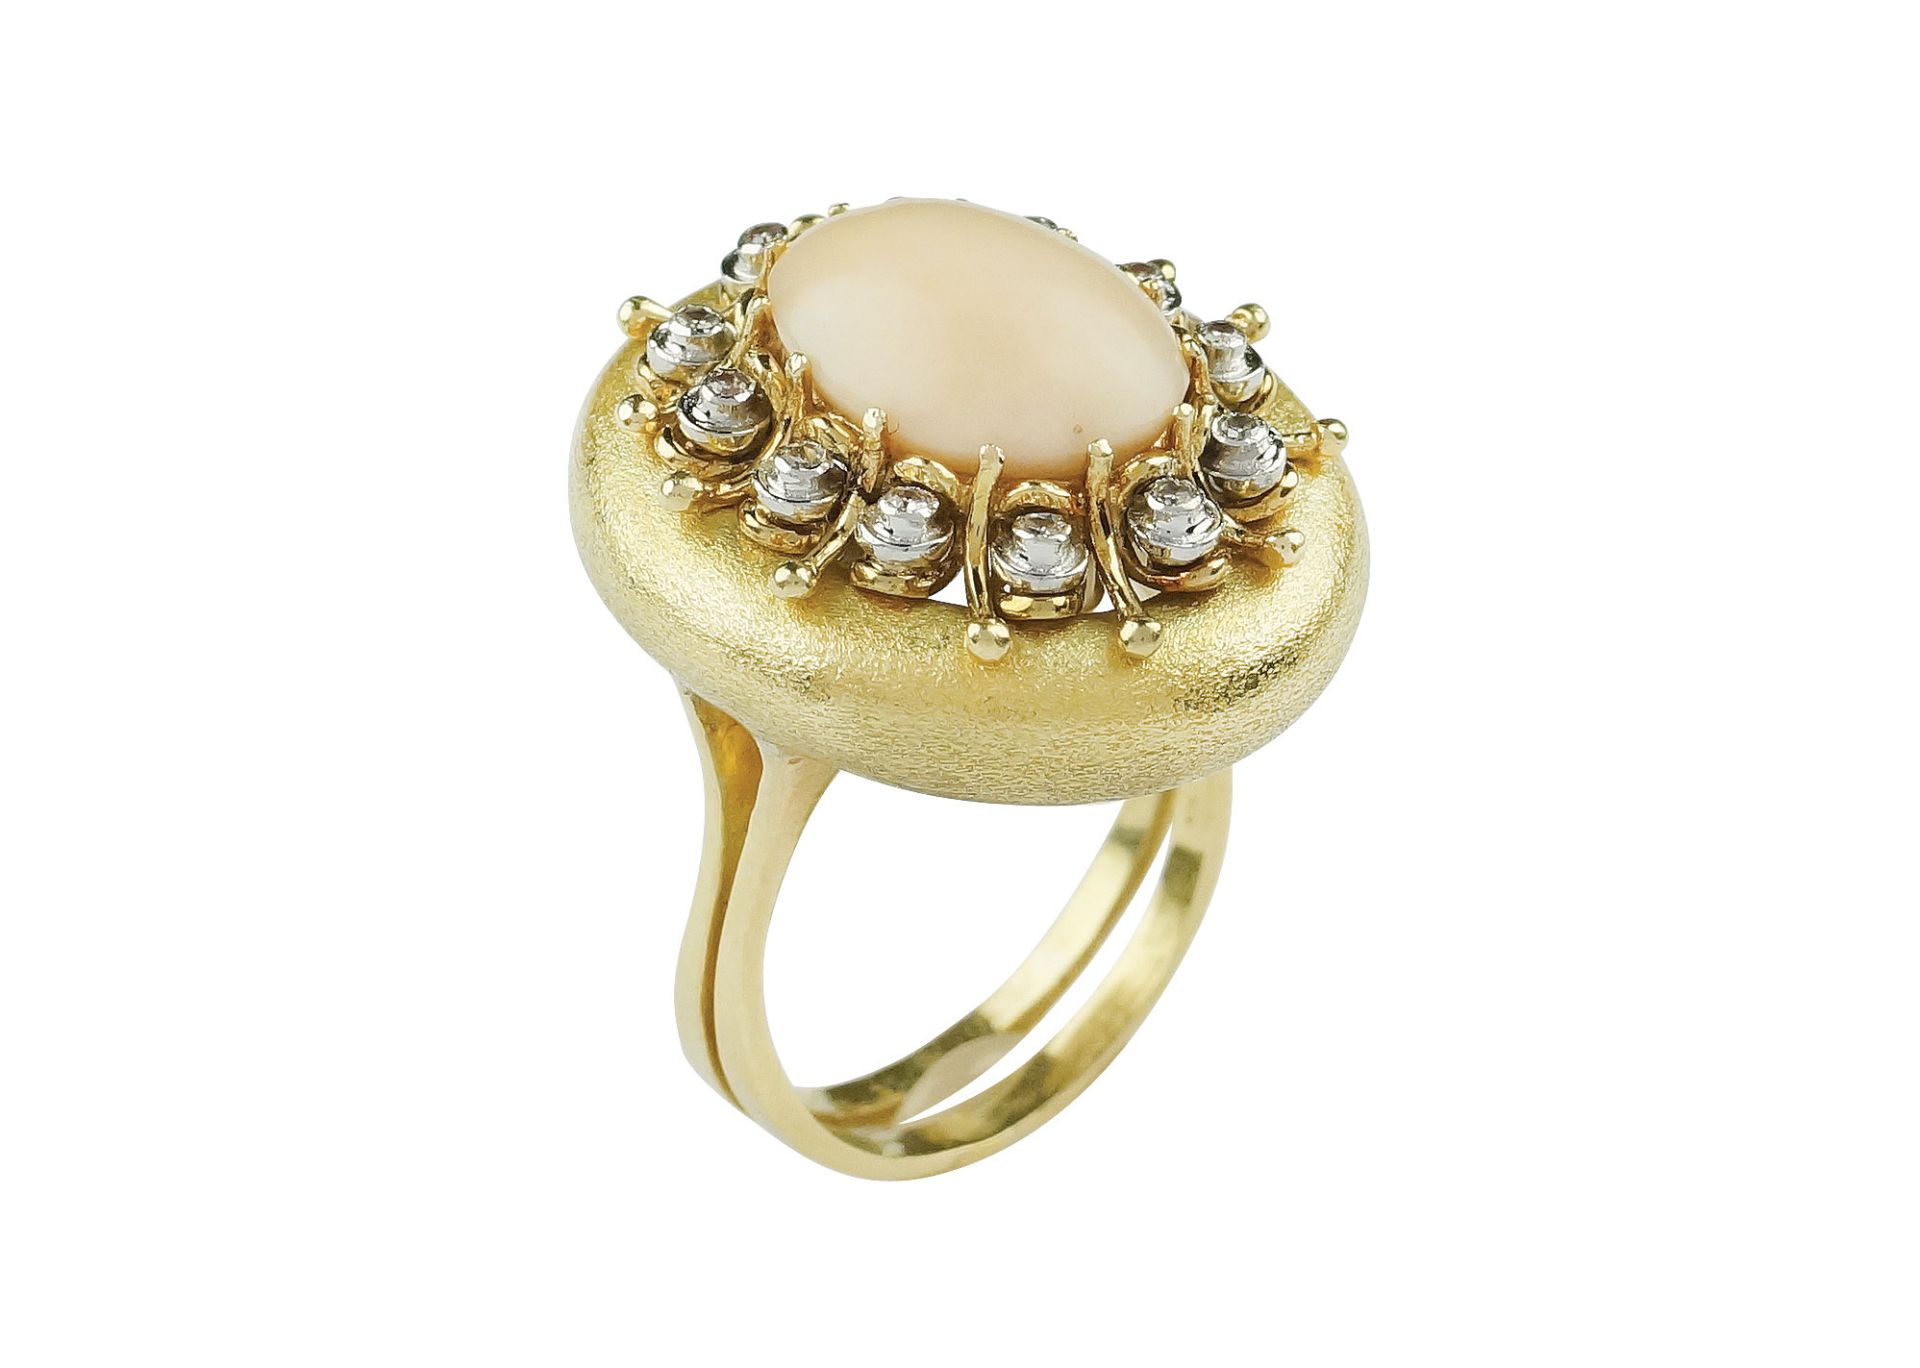 An 18k gold, coral and diamond ring